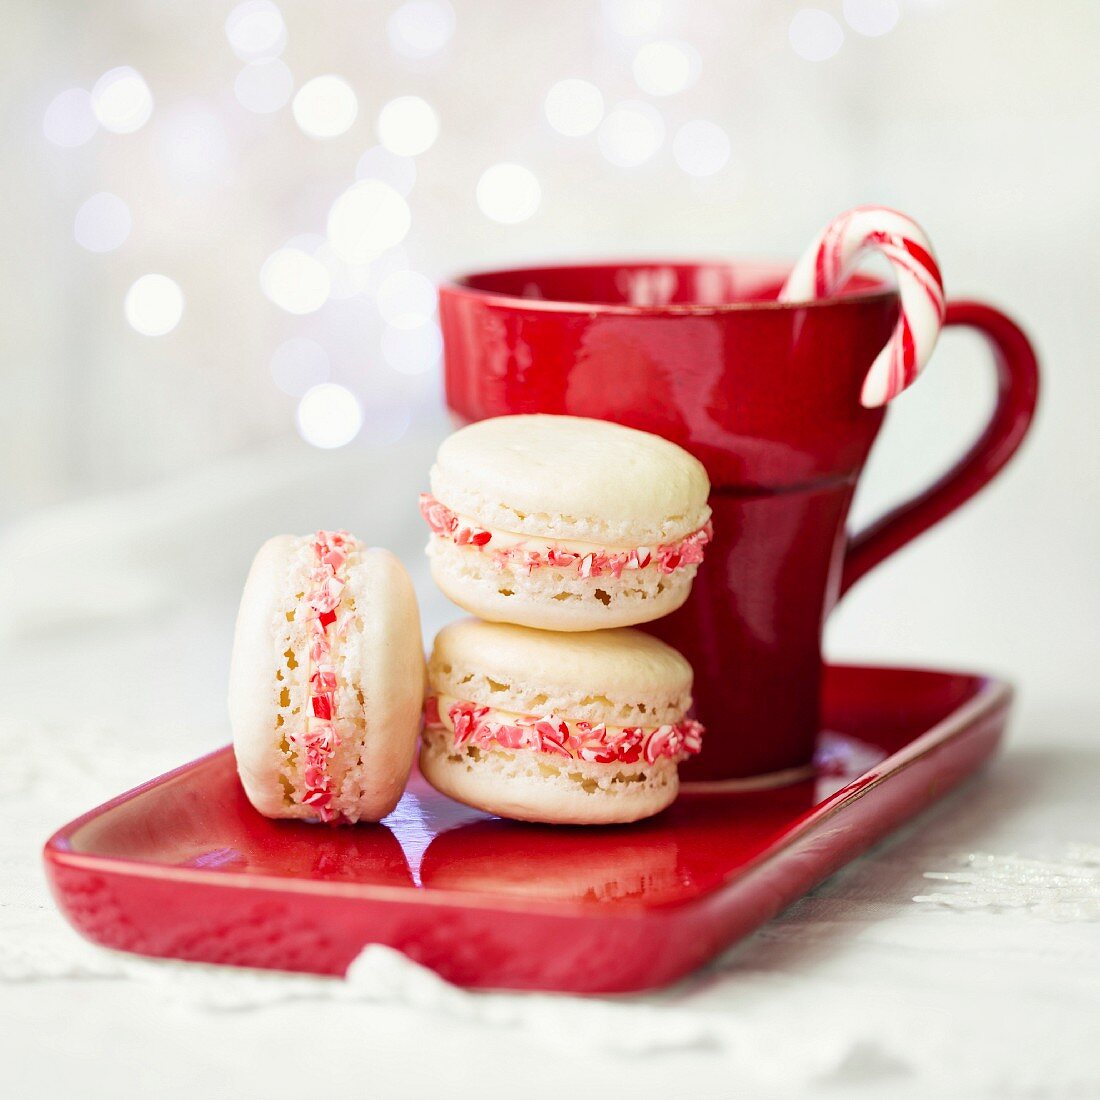 Macarons decorated with crushed candy canes